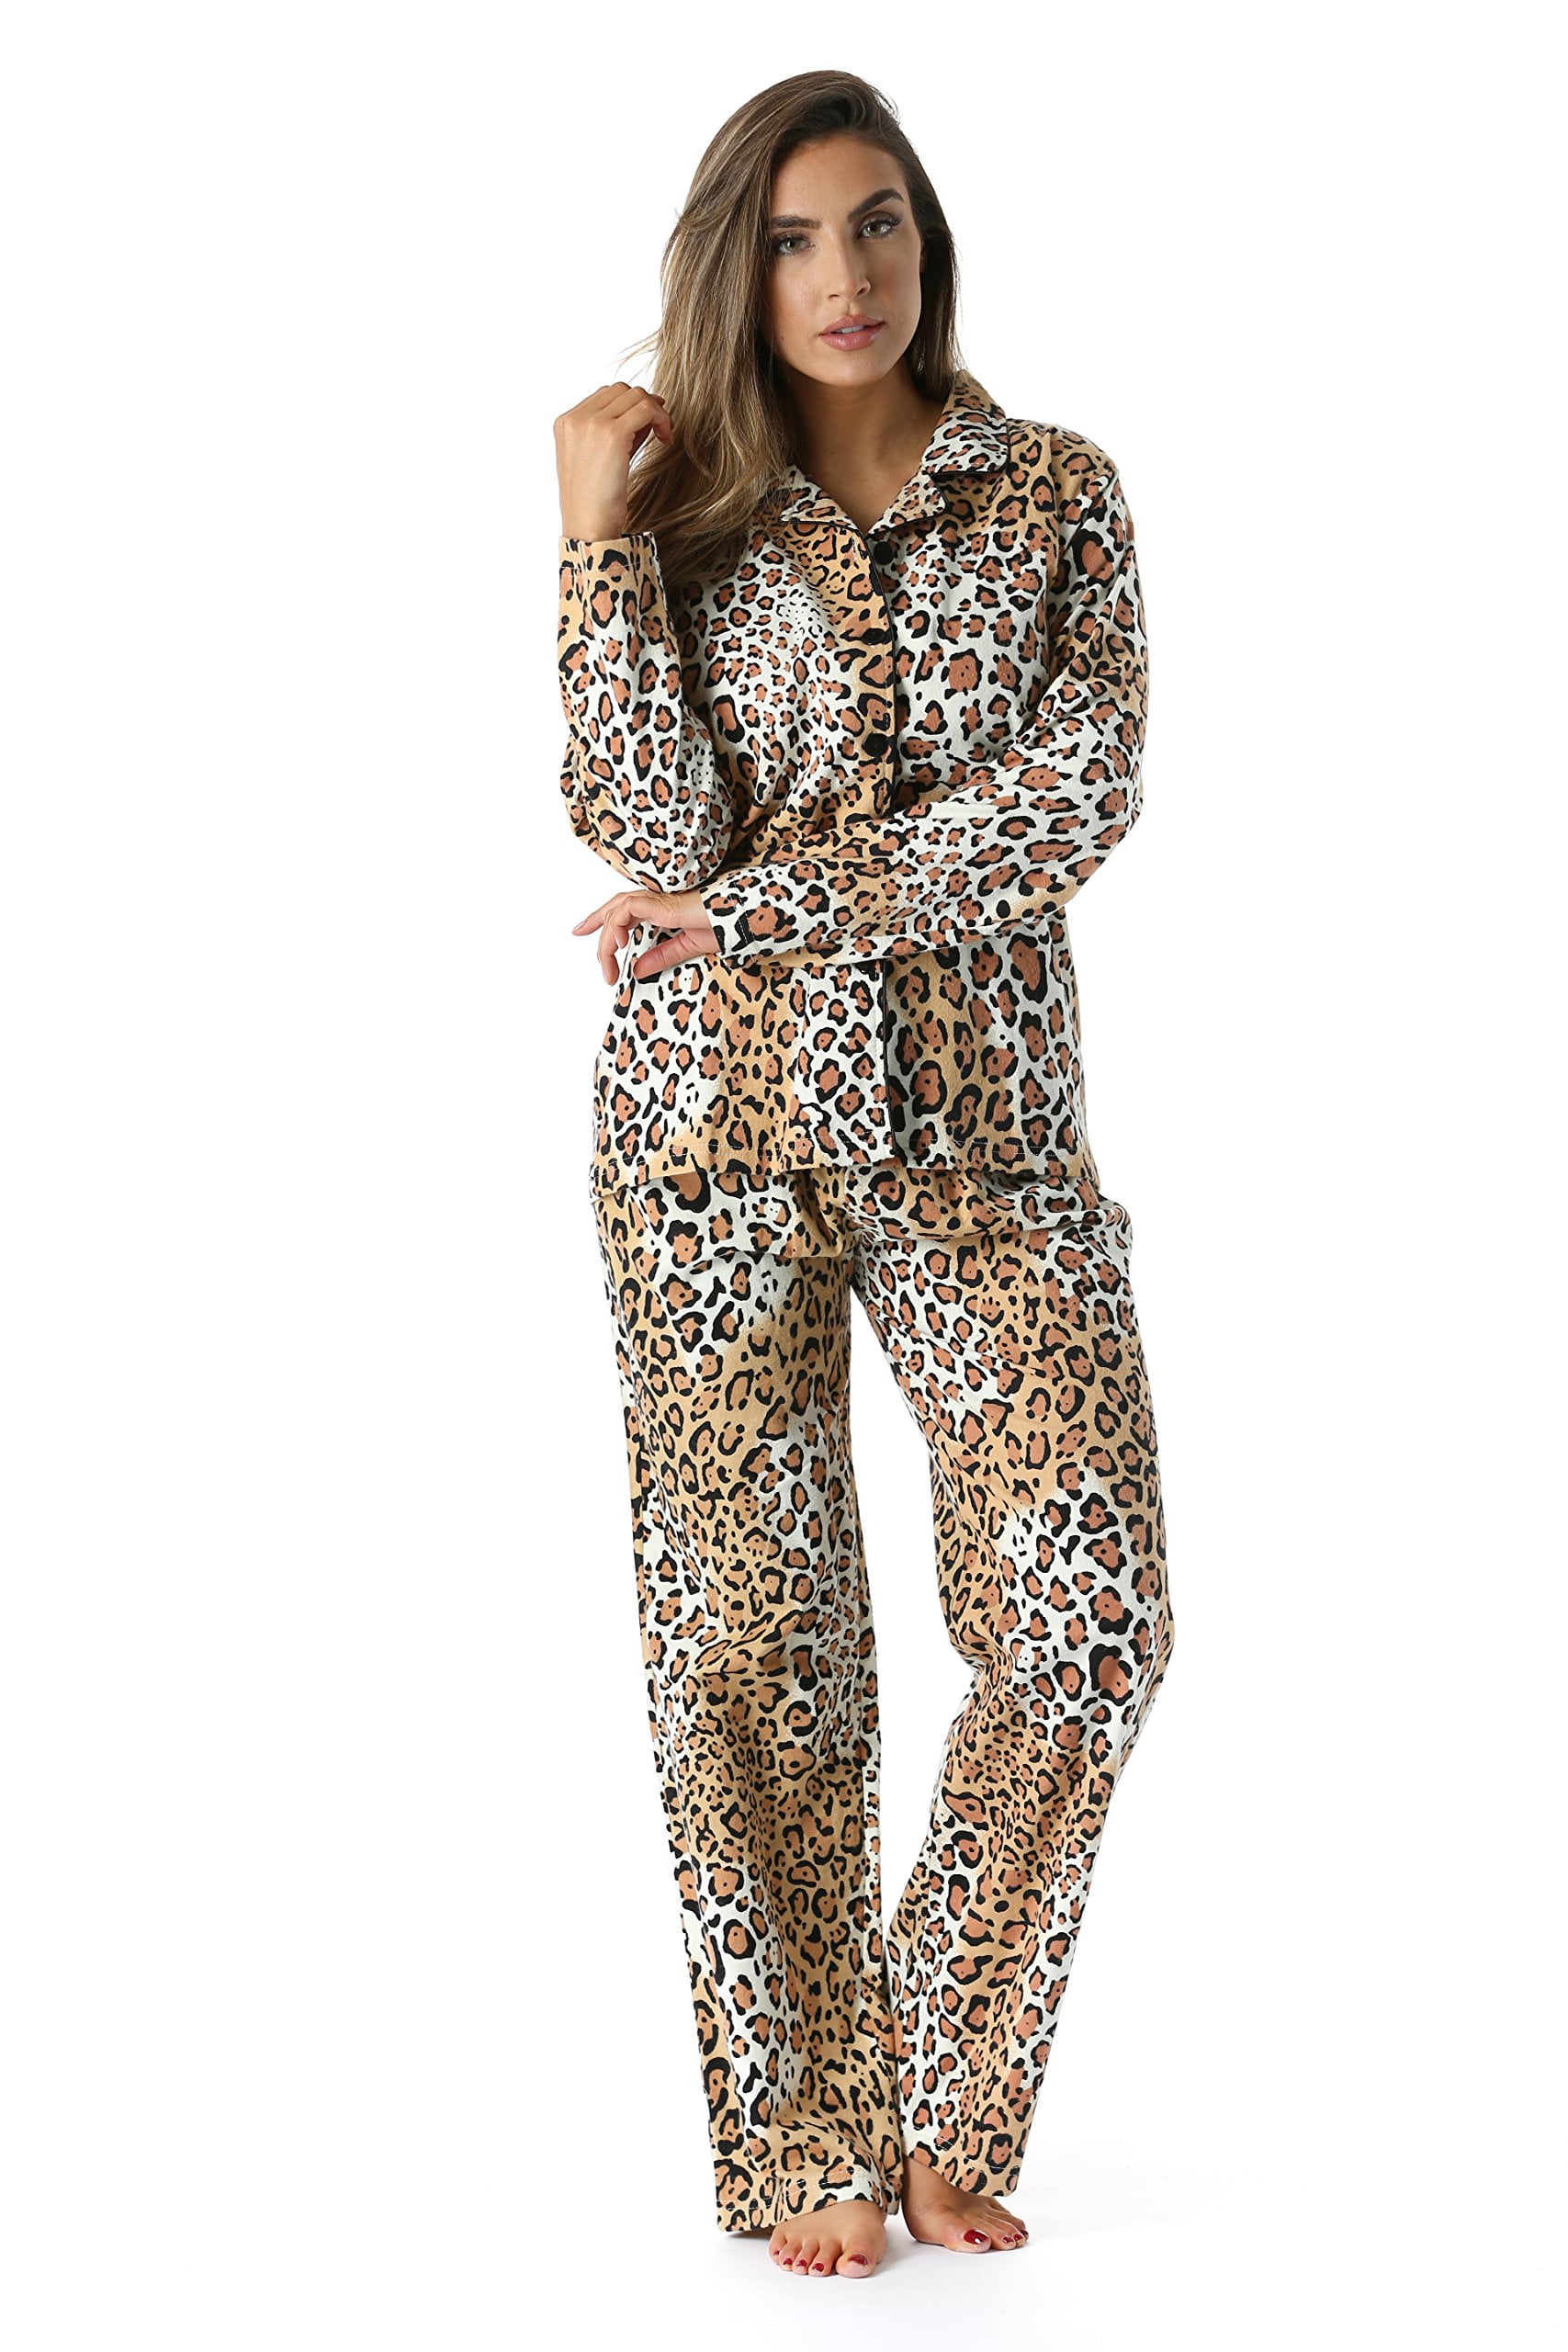 #followme Printed Flannel Button Front PJ Pant Set (Leopard, Small ...